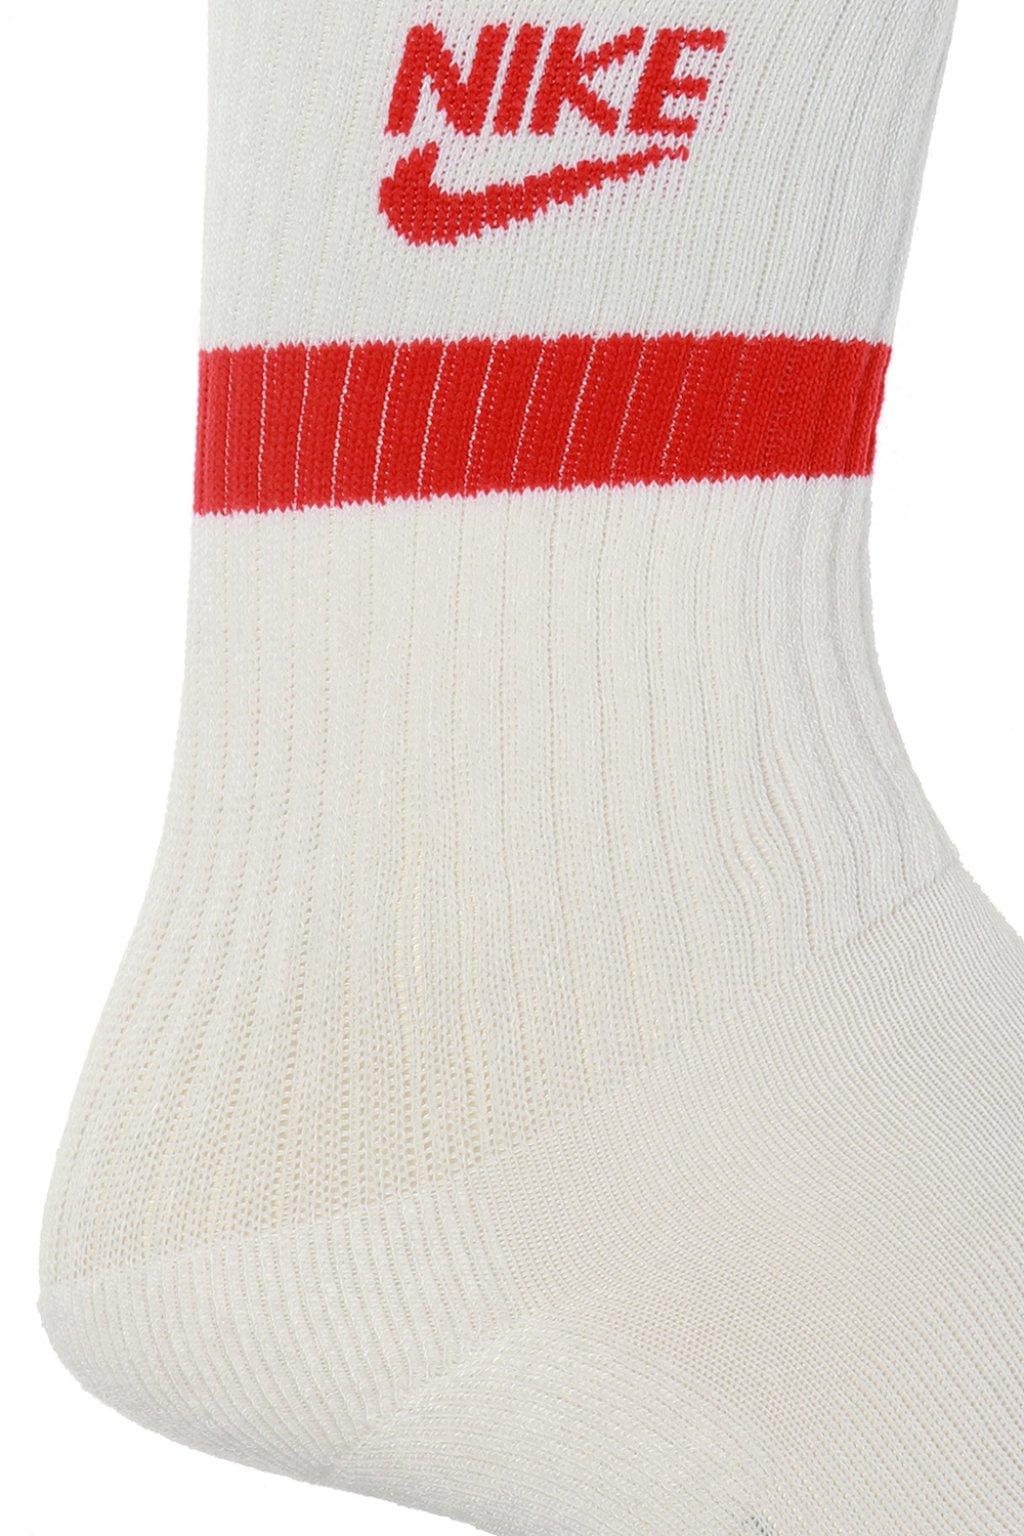 Nike Synthetic Logo-embroidered Socks 2-pack in White for Men - Lyst